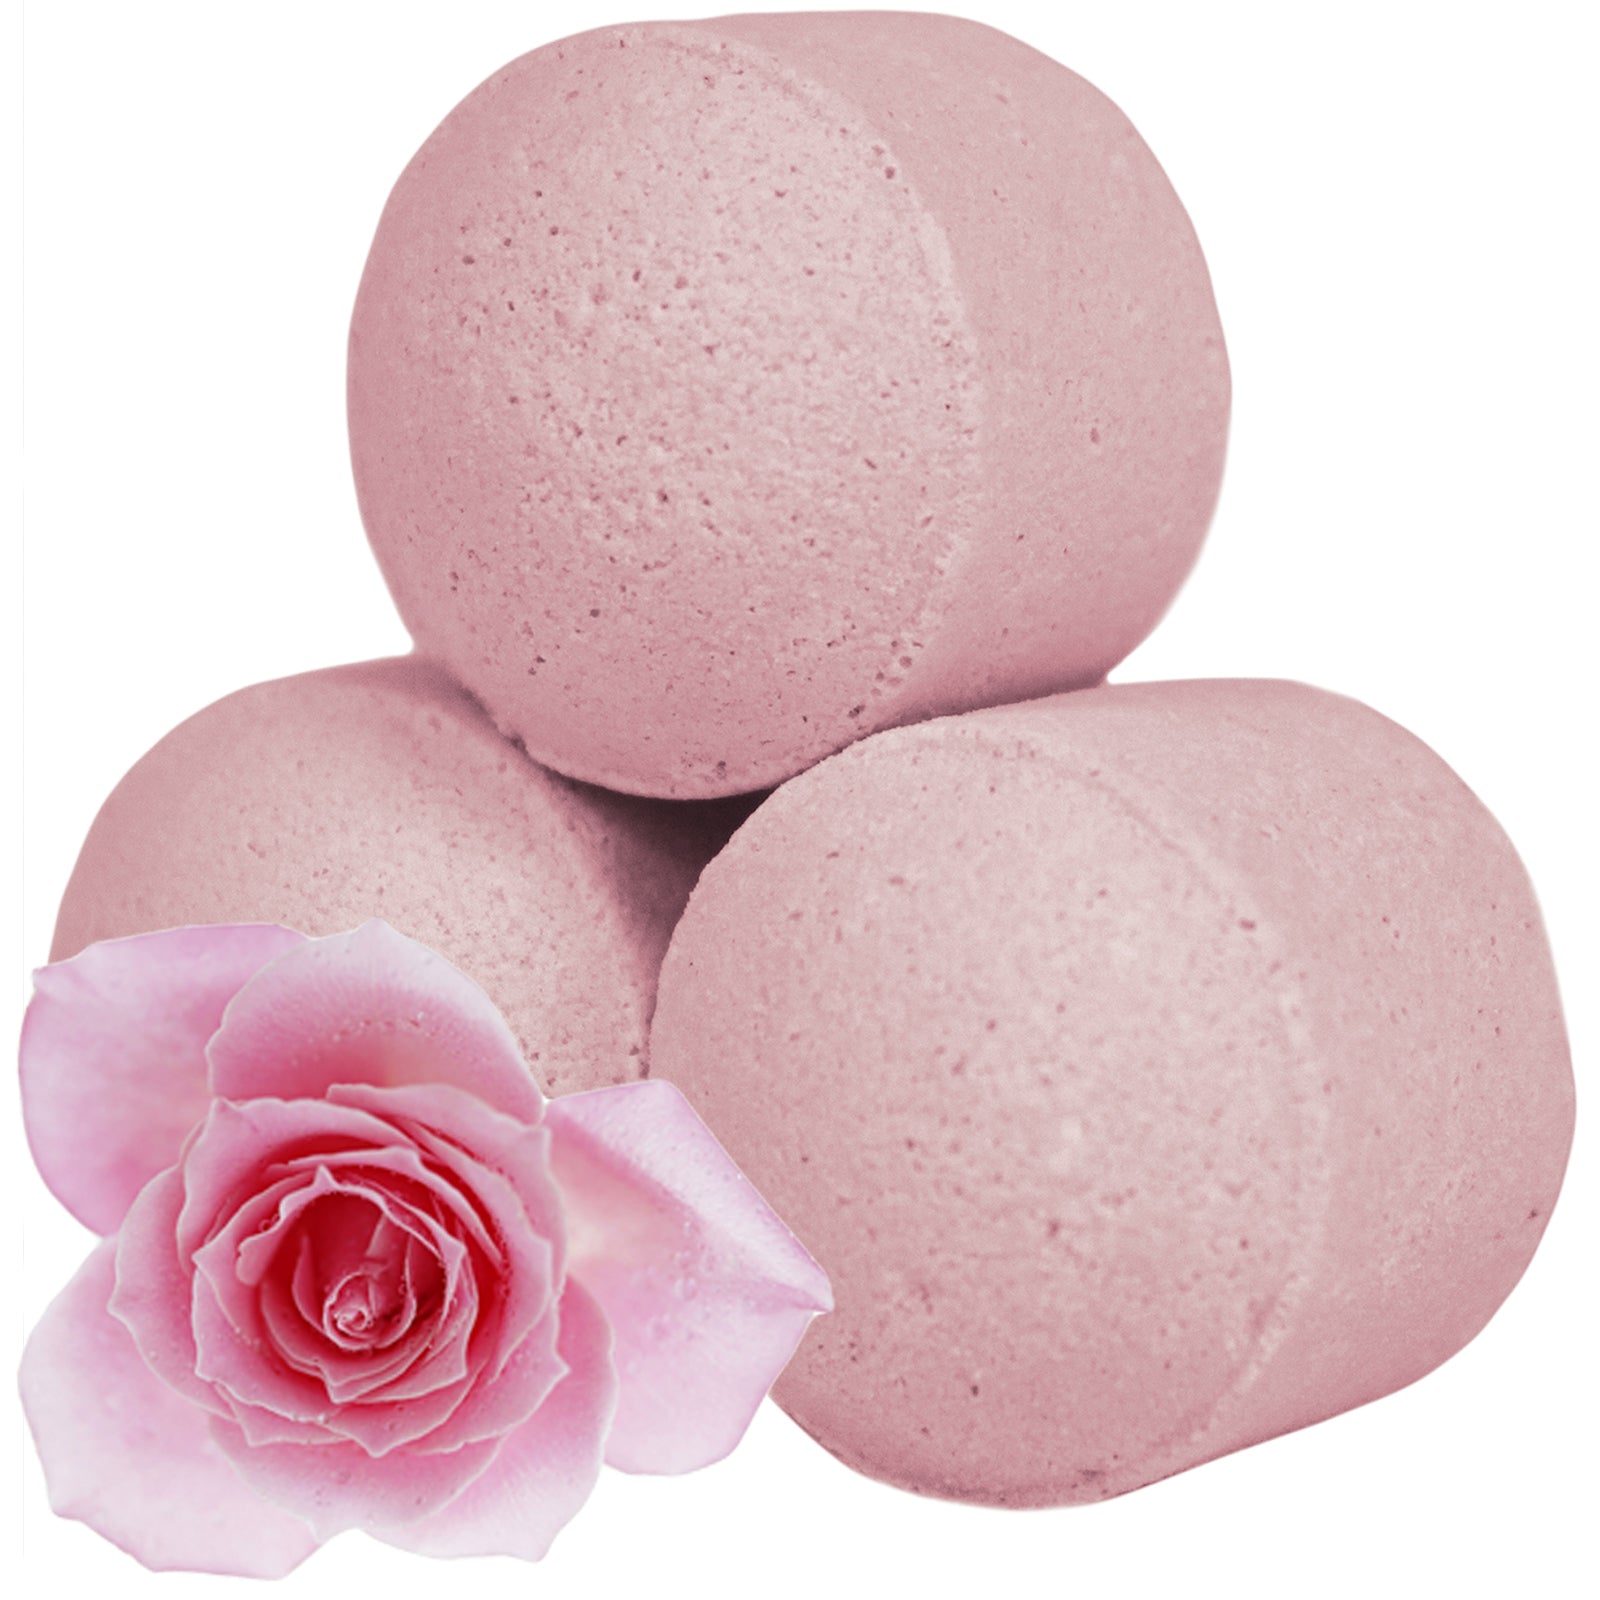 View Pack Of 10 Chill Pills Rose information